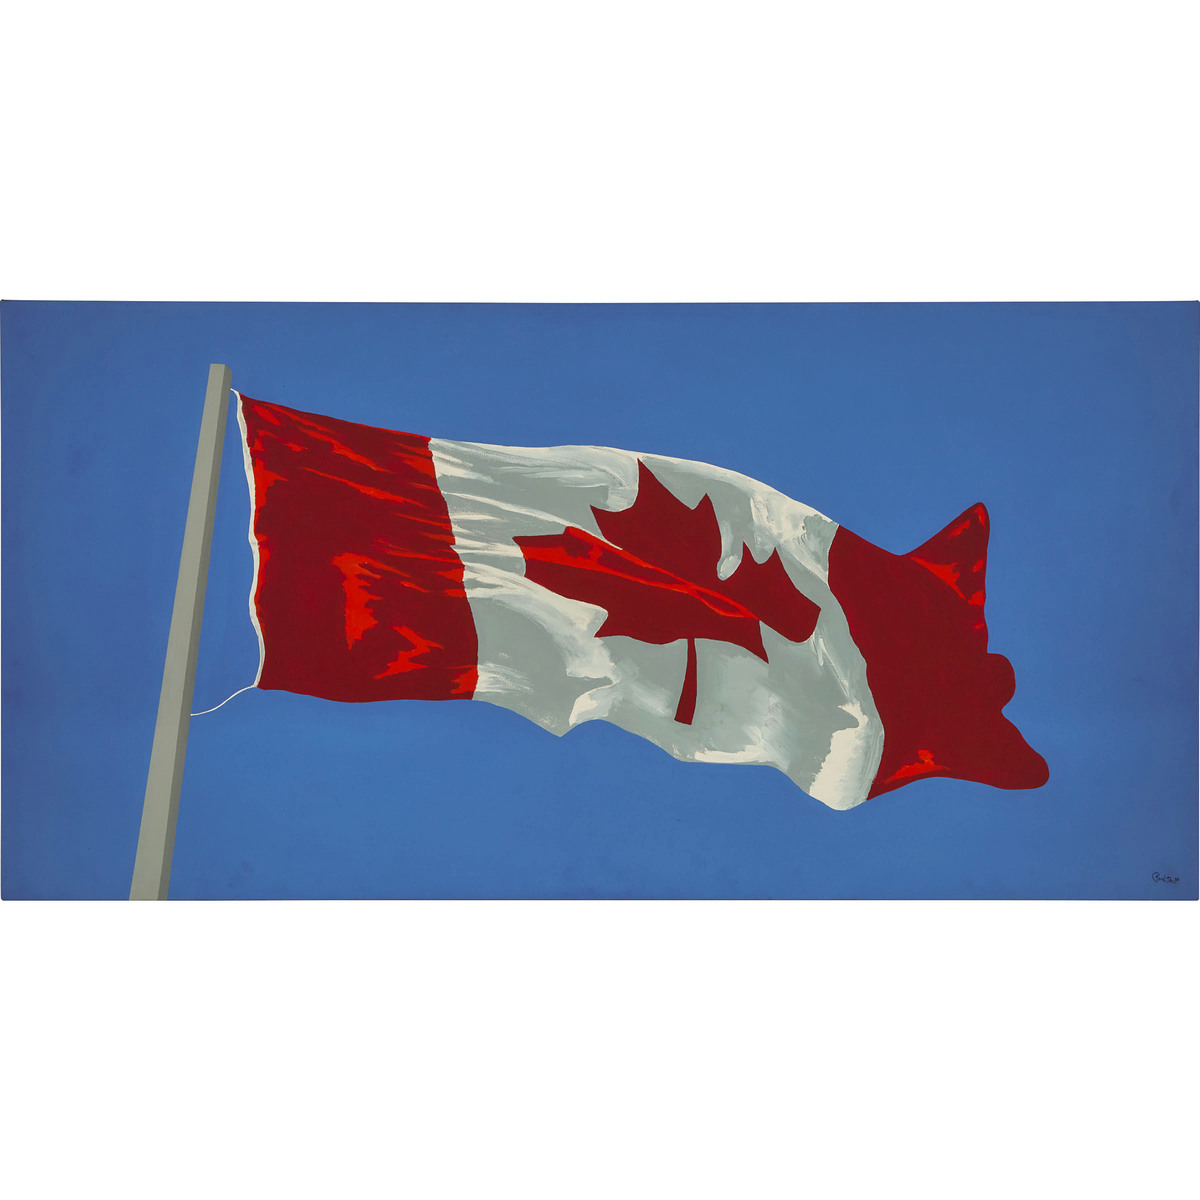 Charles Pachter (b. 1942), Canadian, THE PAINTED FLAG, 1986, 36 x 72 in — 91.4 x 182.9 cm